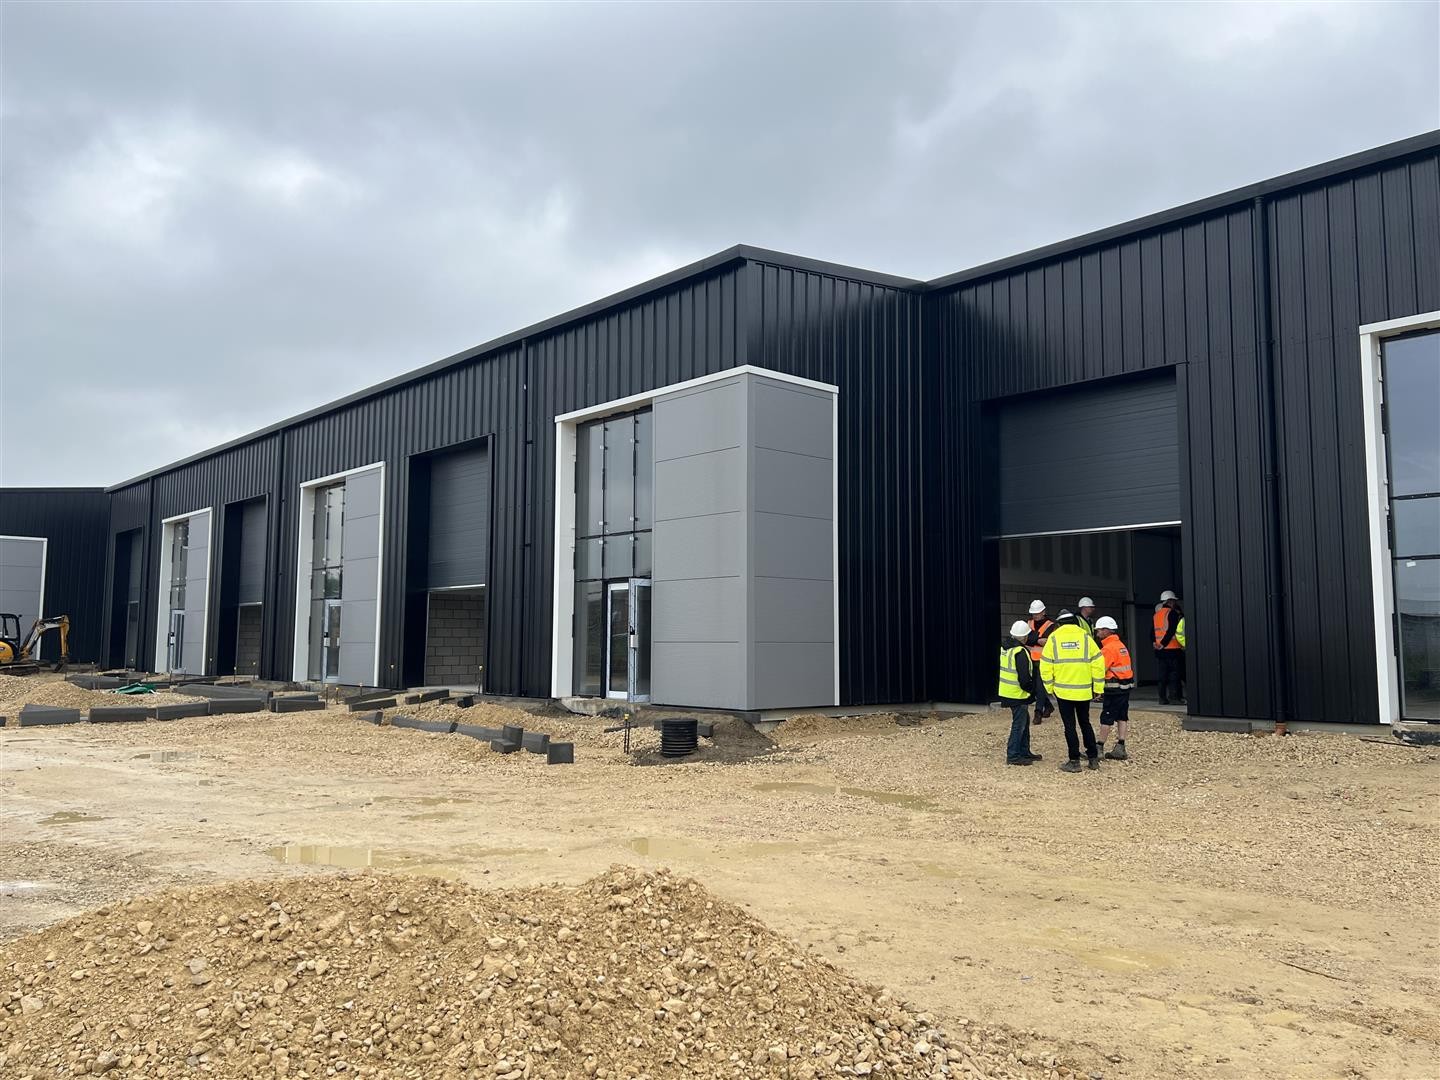 Featured image 1 for Strong interest and quality build works generate positive progress at Sleaford Moor Enterprise Park